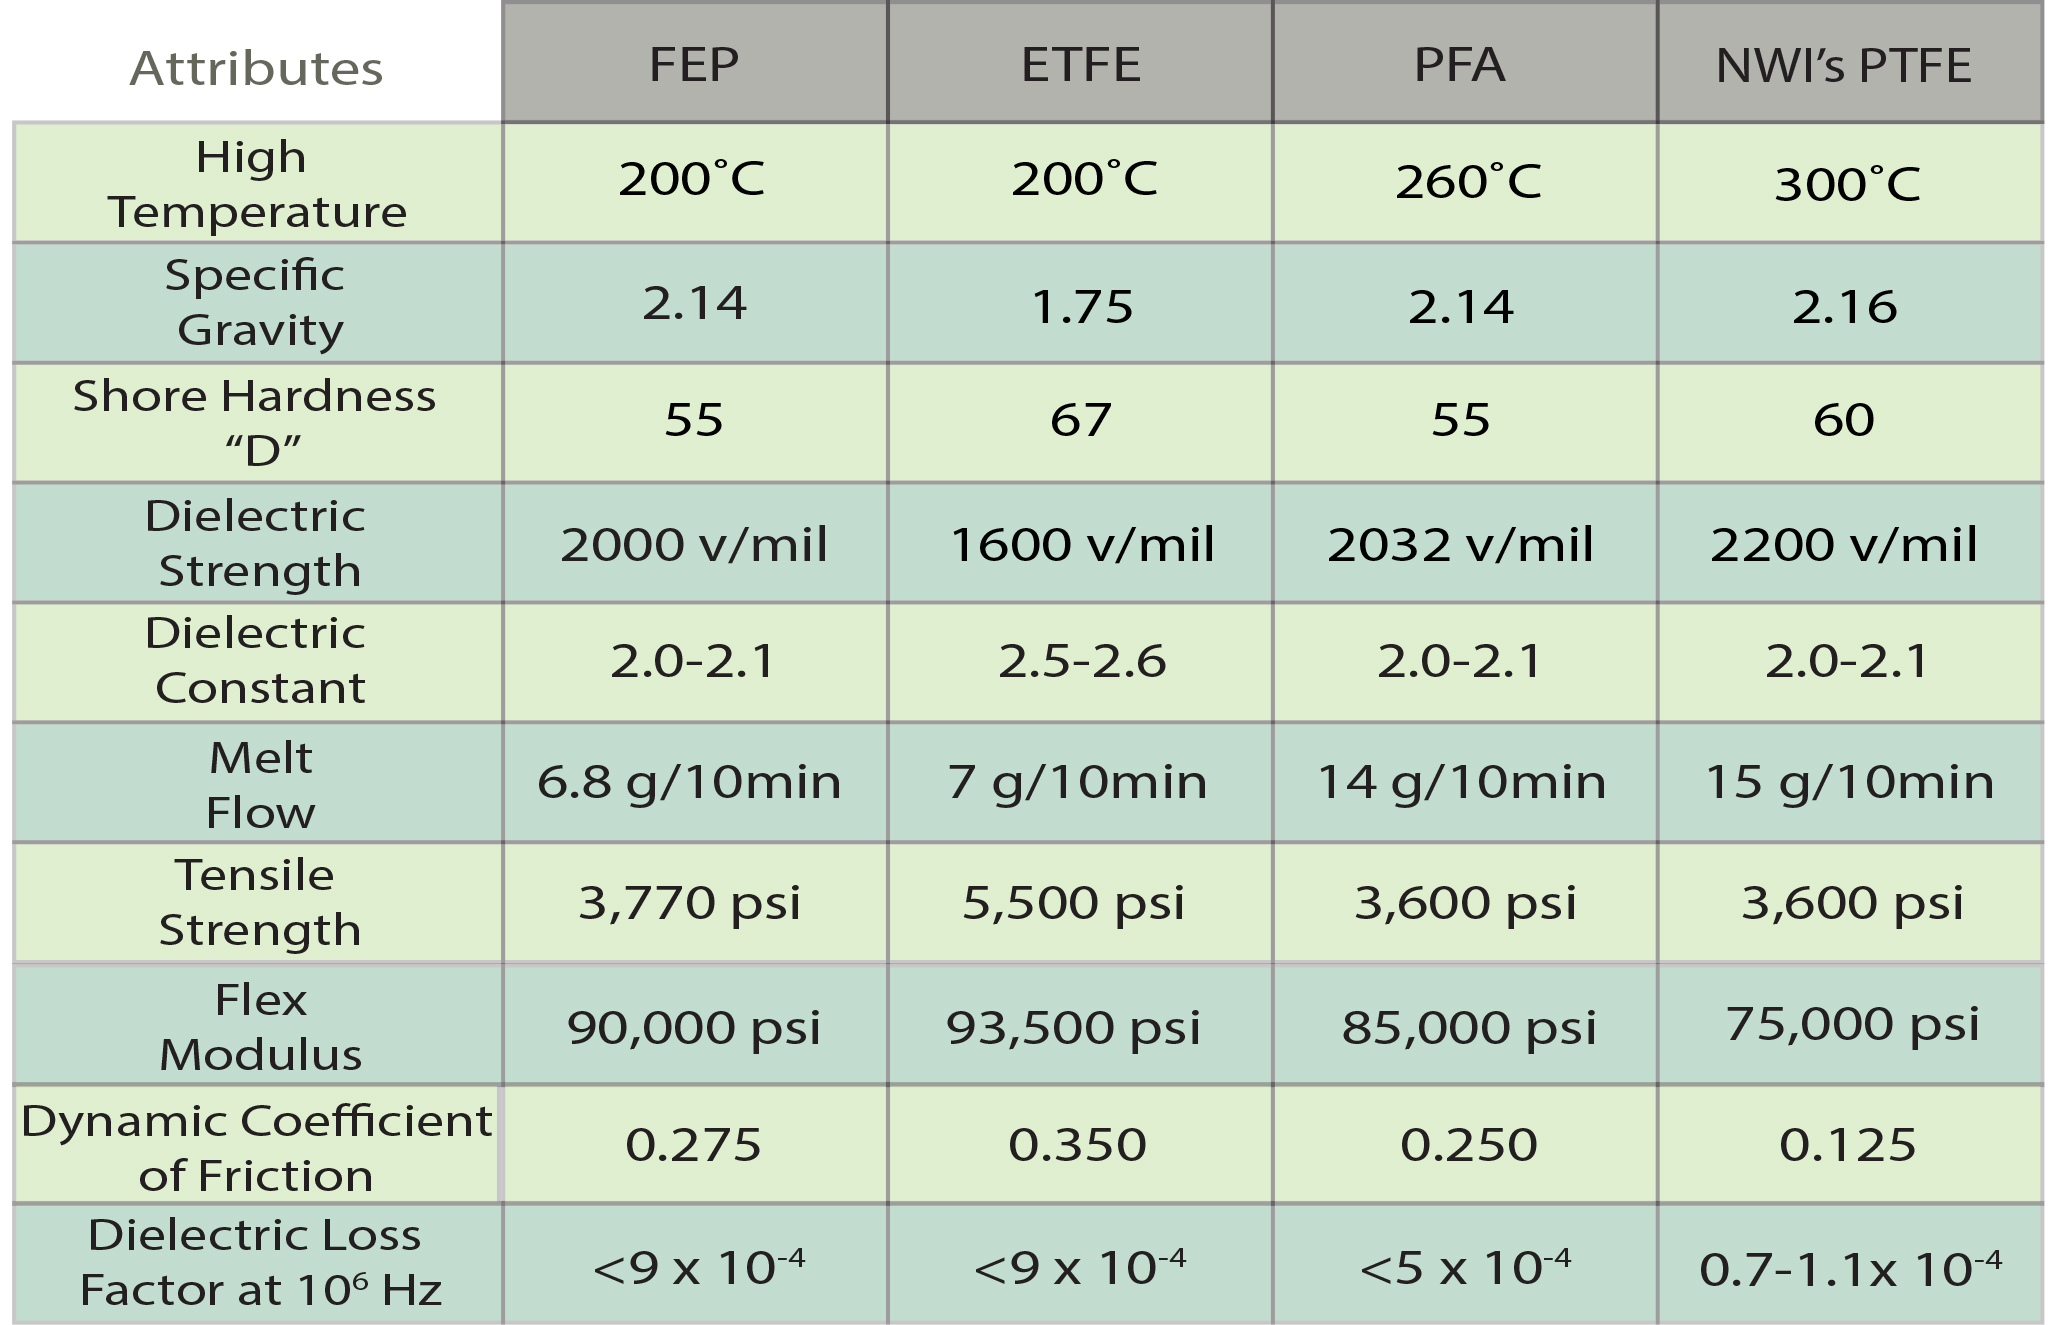 PTFE compared to common fluoropolymers